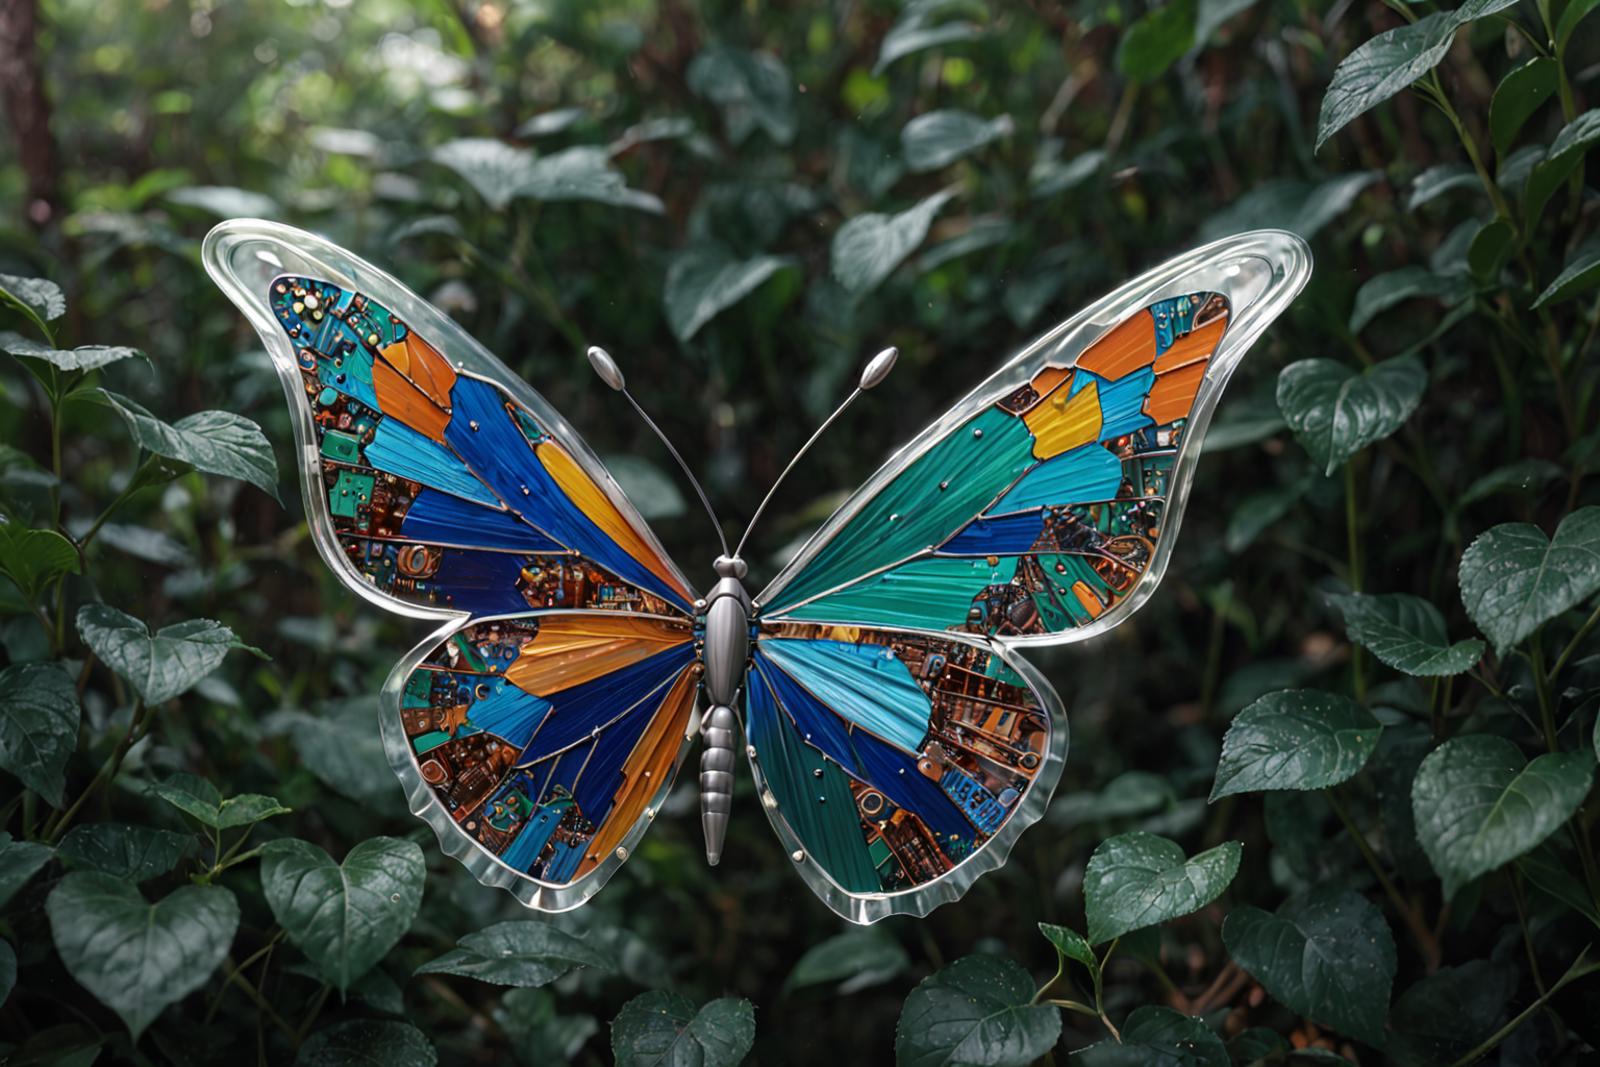 A butterfly made of metal and glass sits on a leafy plant.